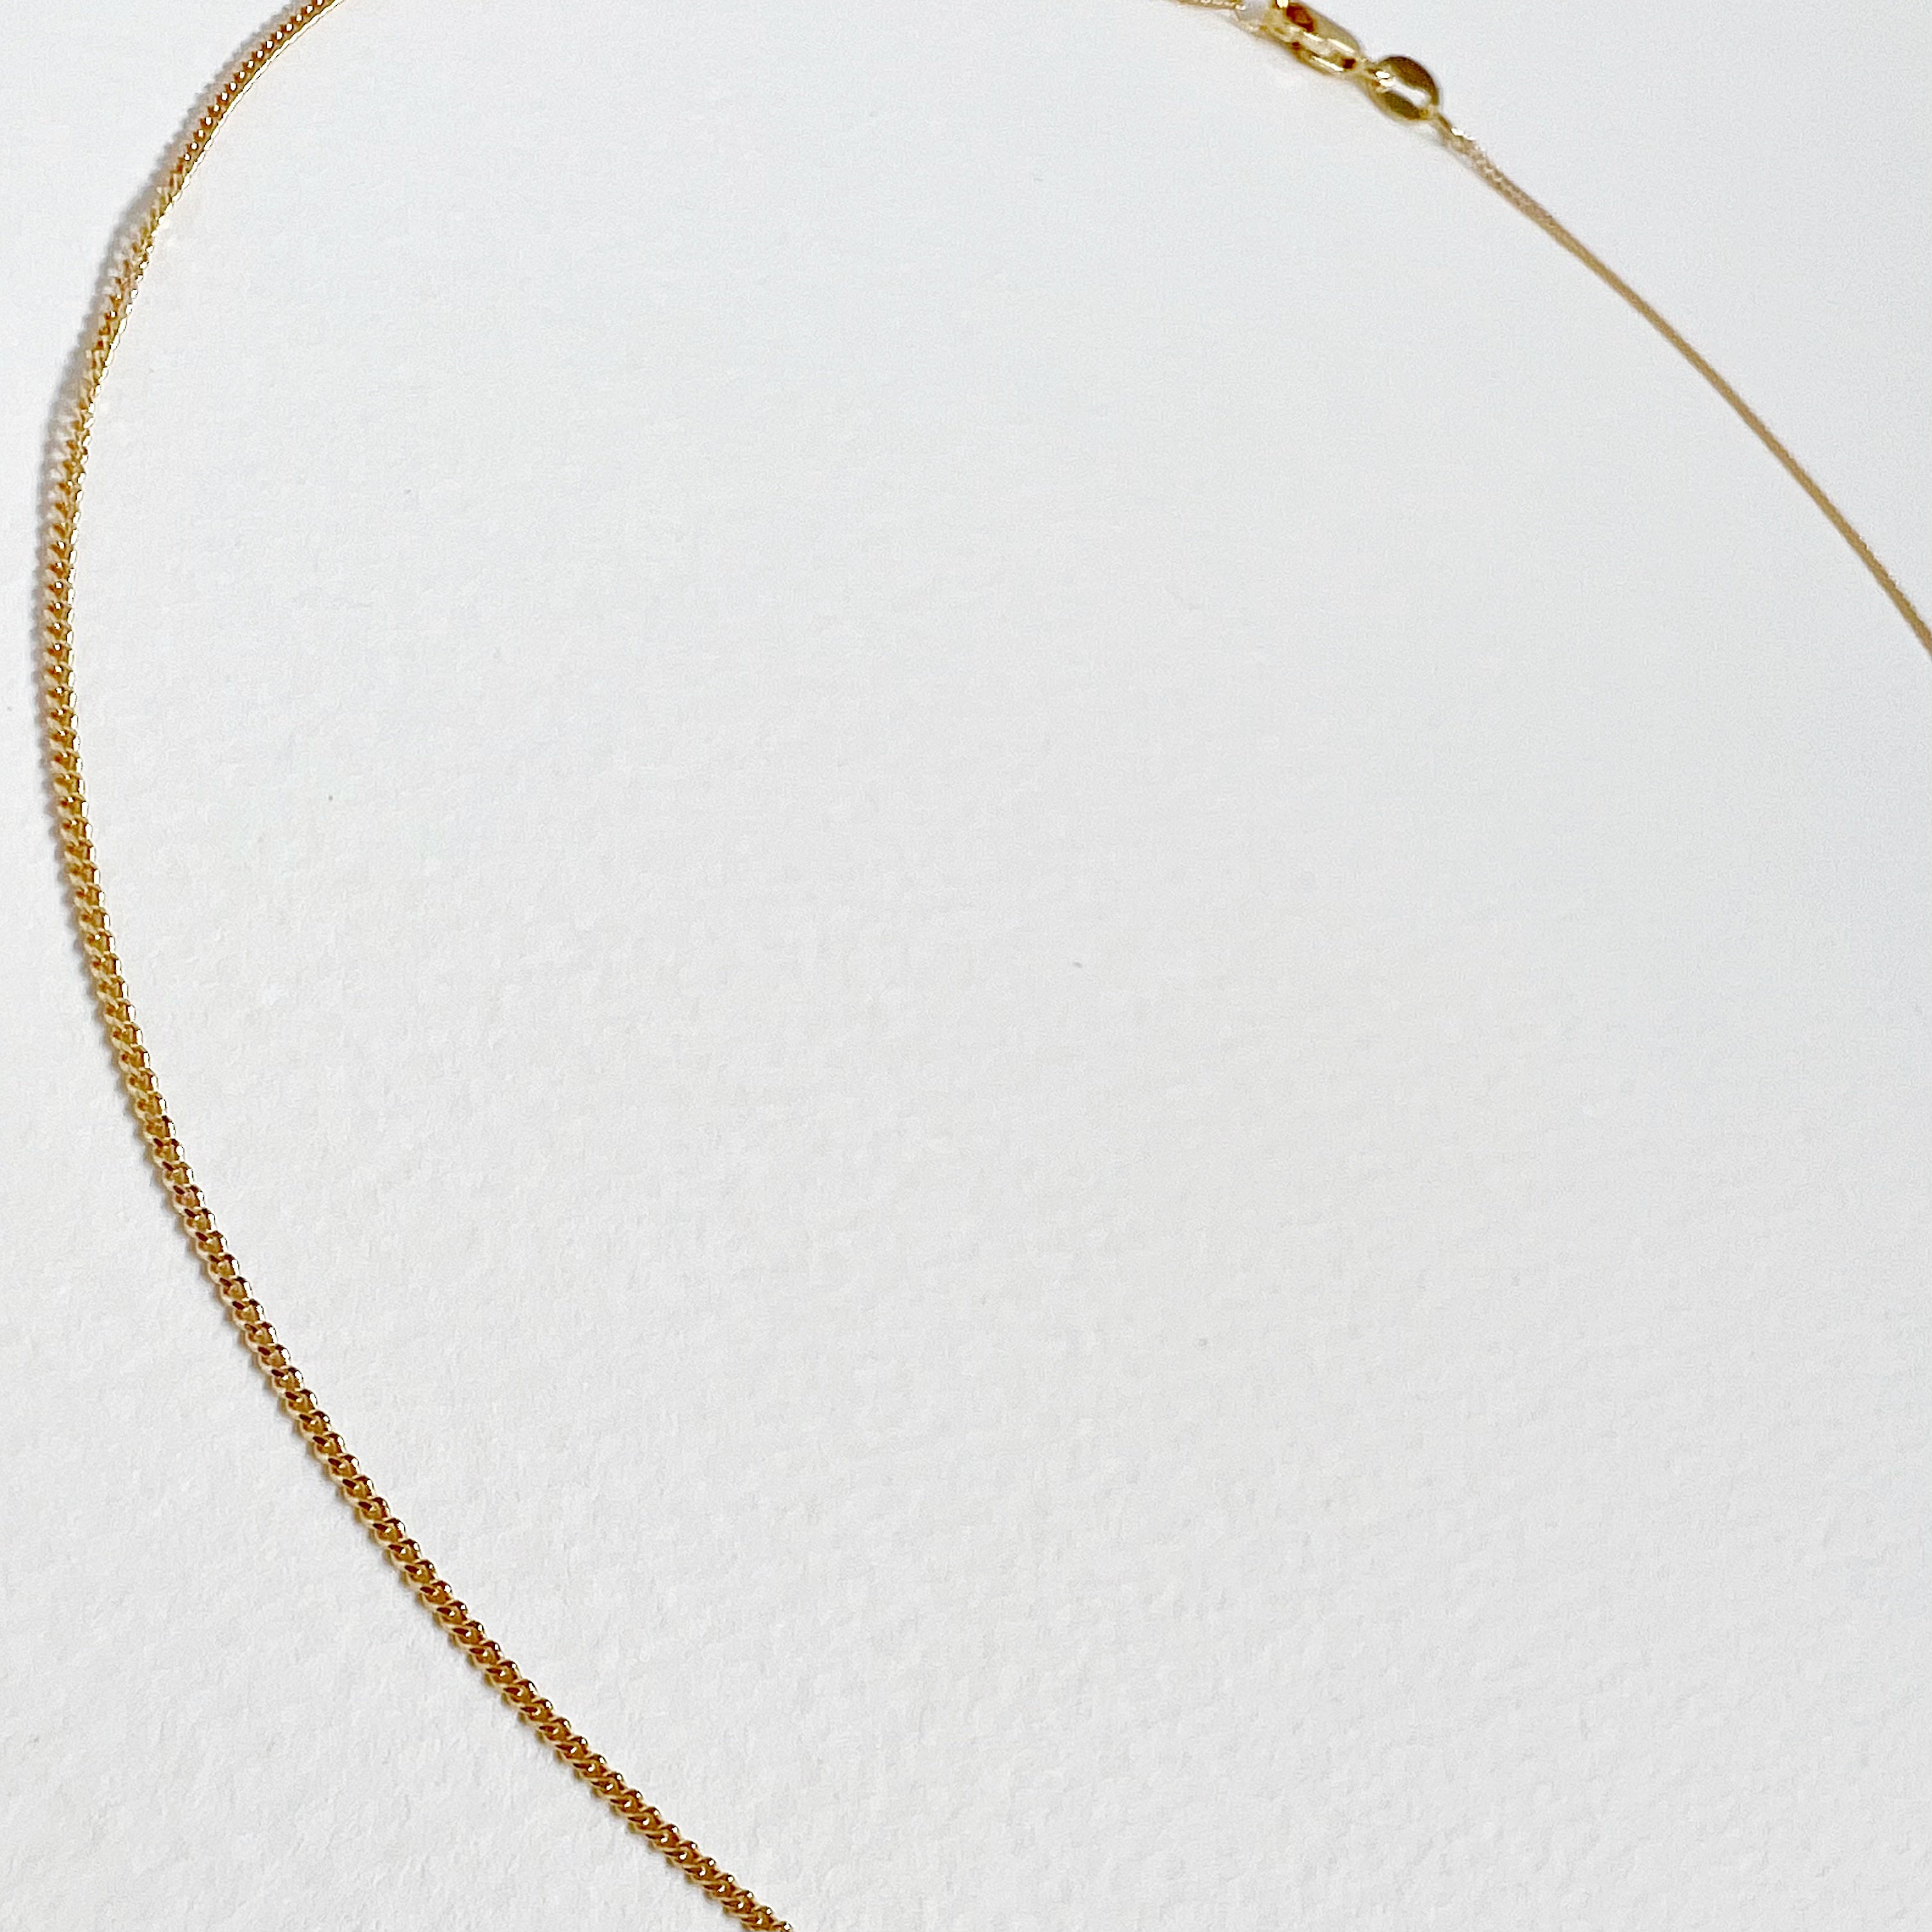 Thin Gold Plated Chain for Women Minimalist Forçat Chain Very 